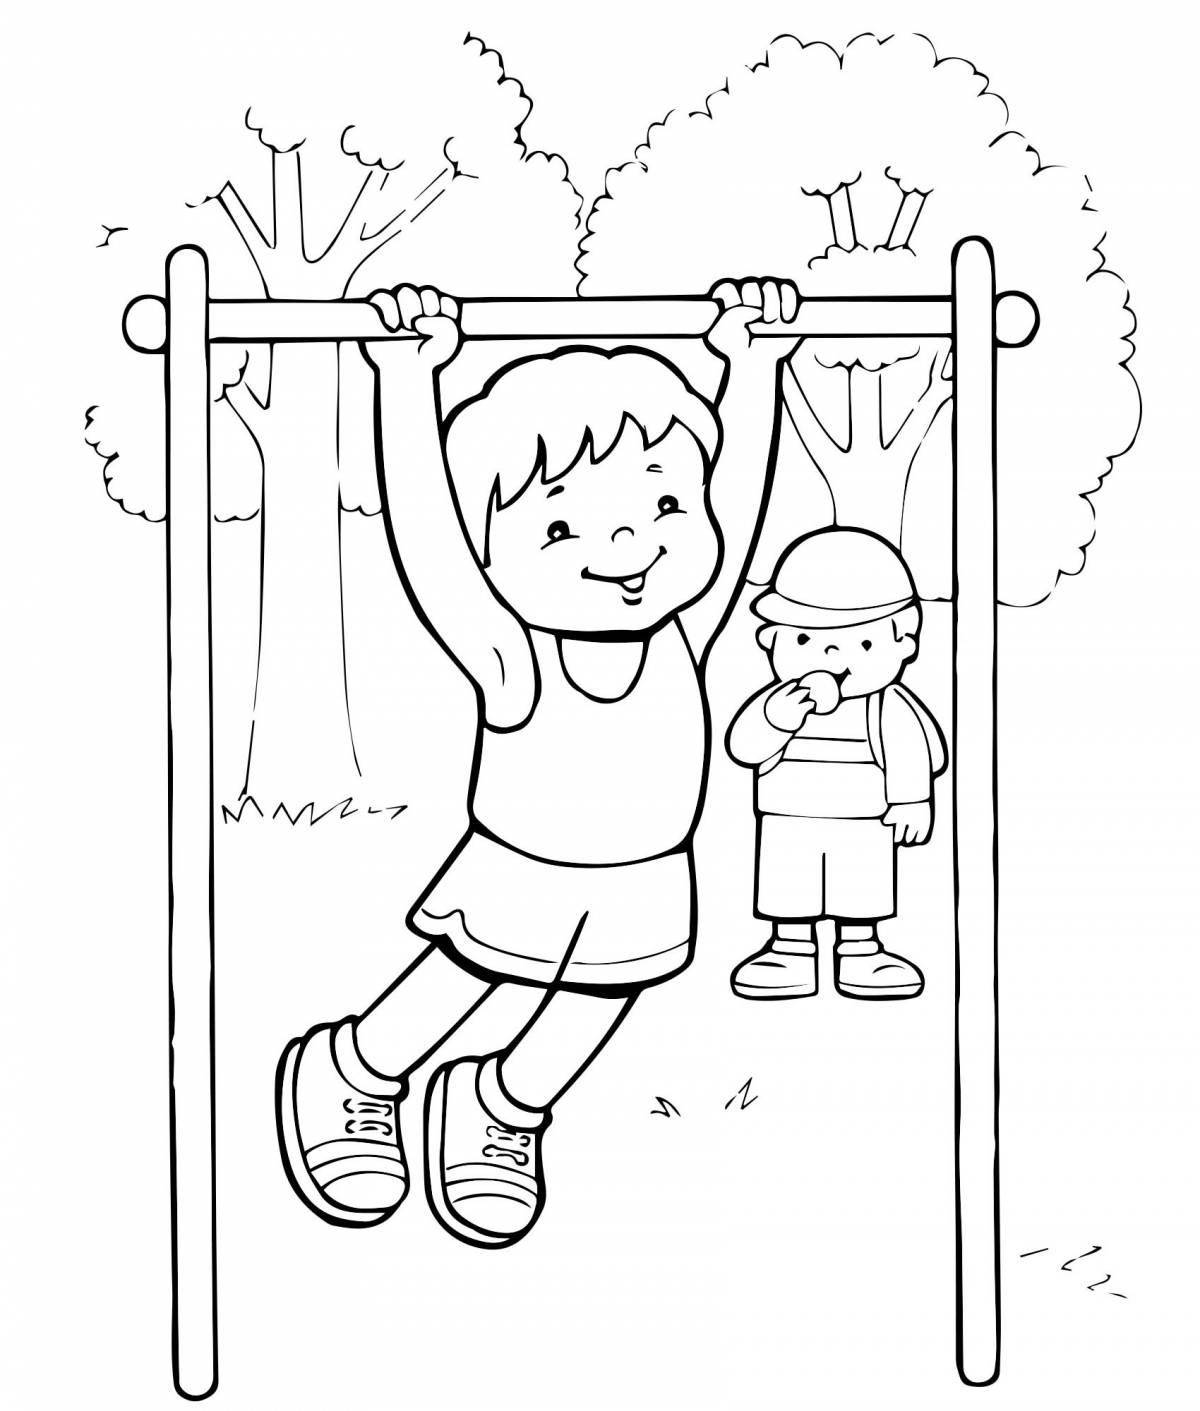 Colorful coloring for children about a healthy lifestyle